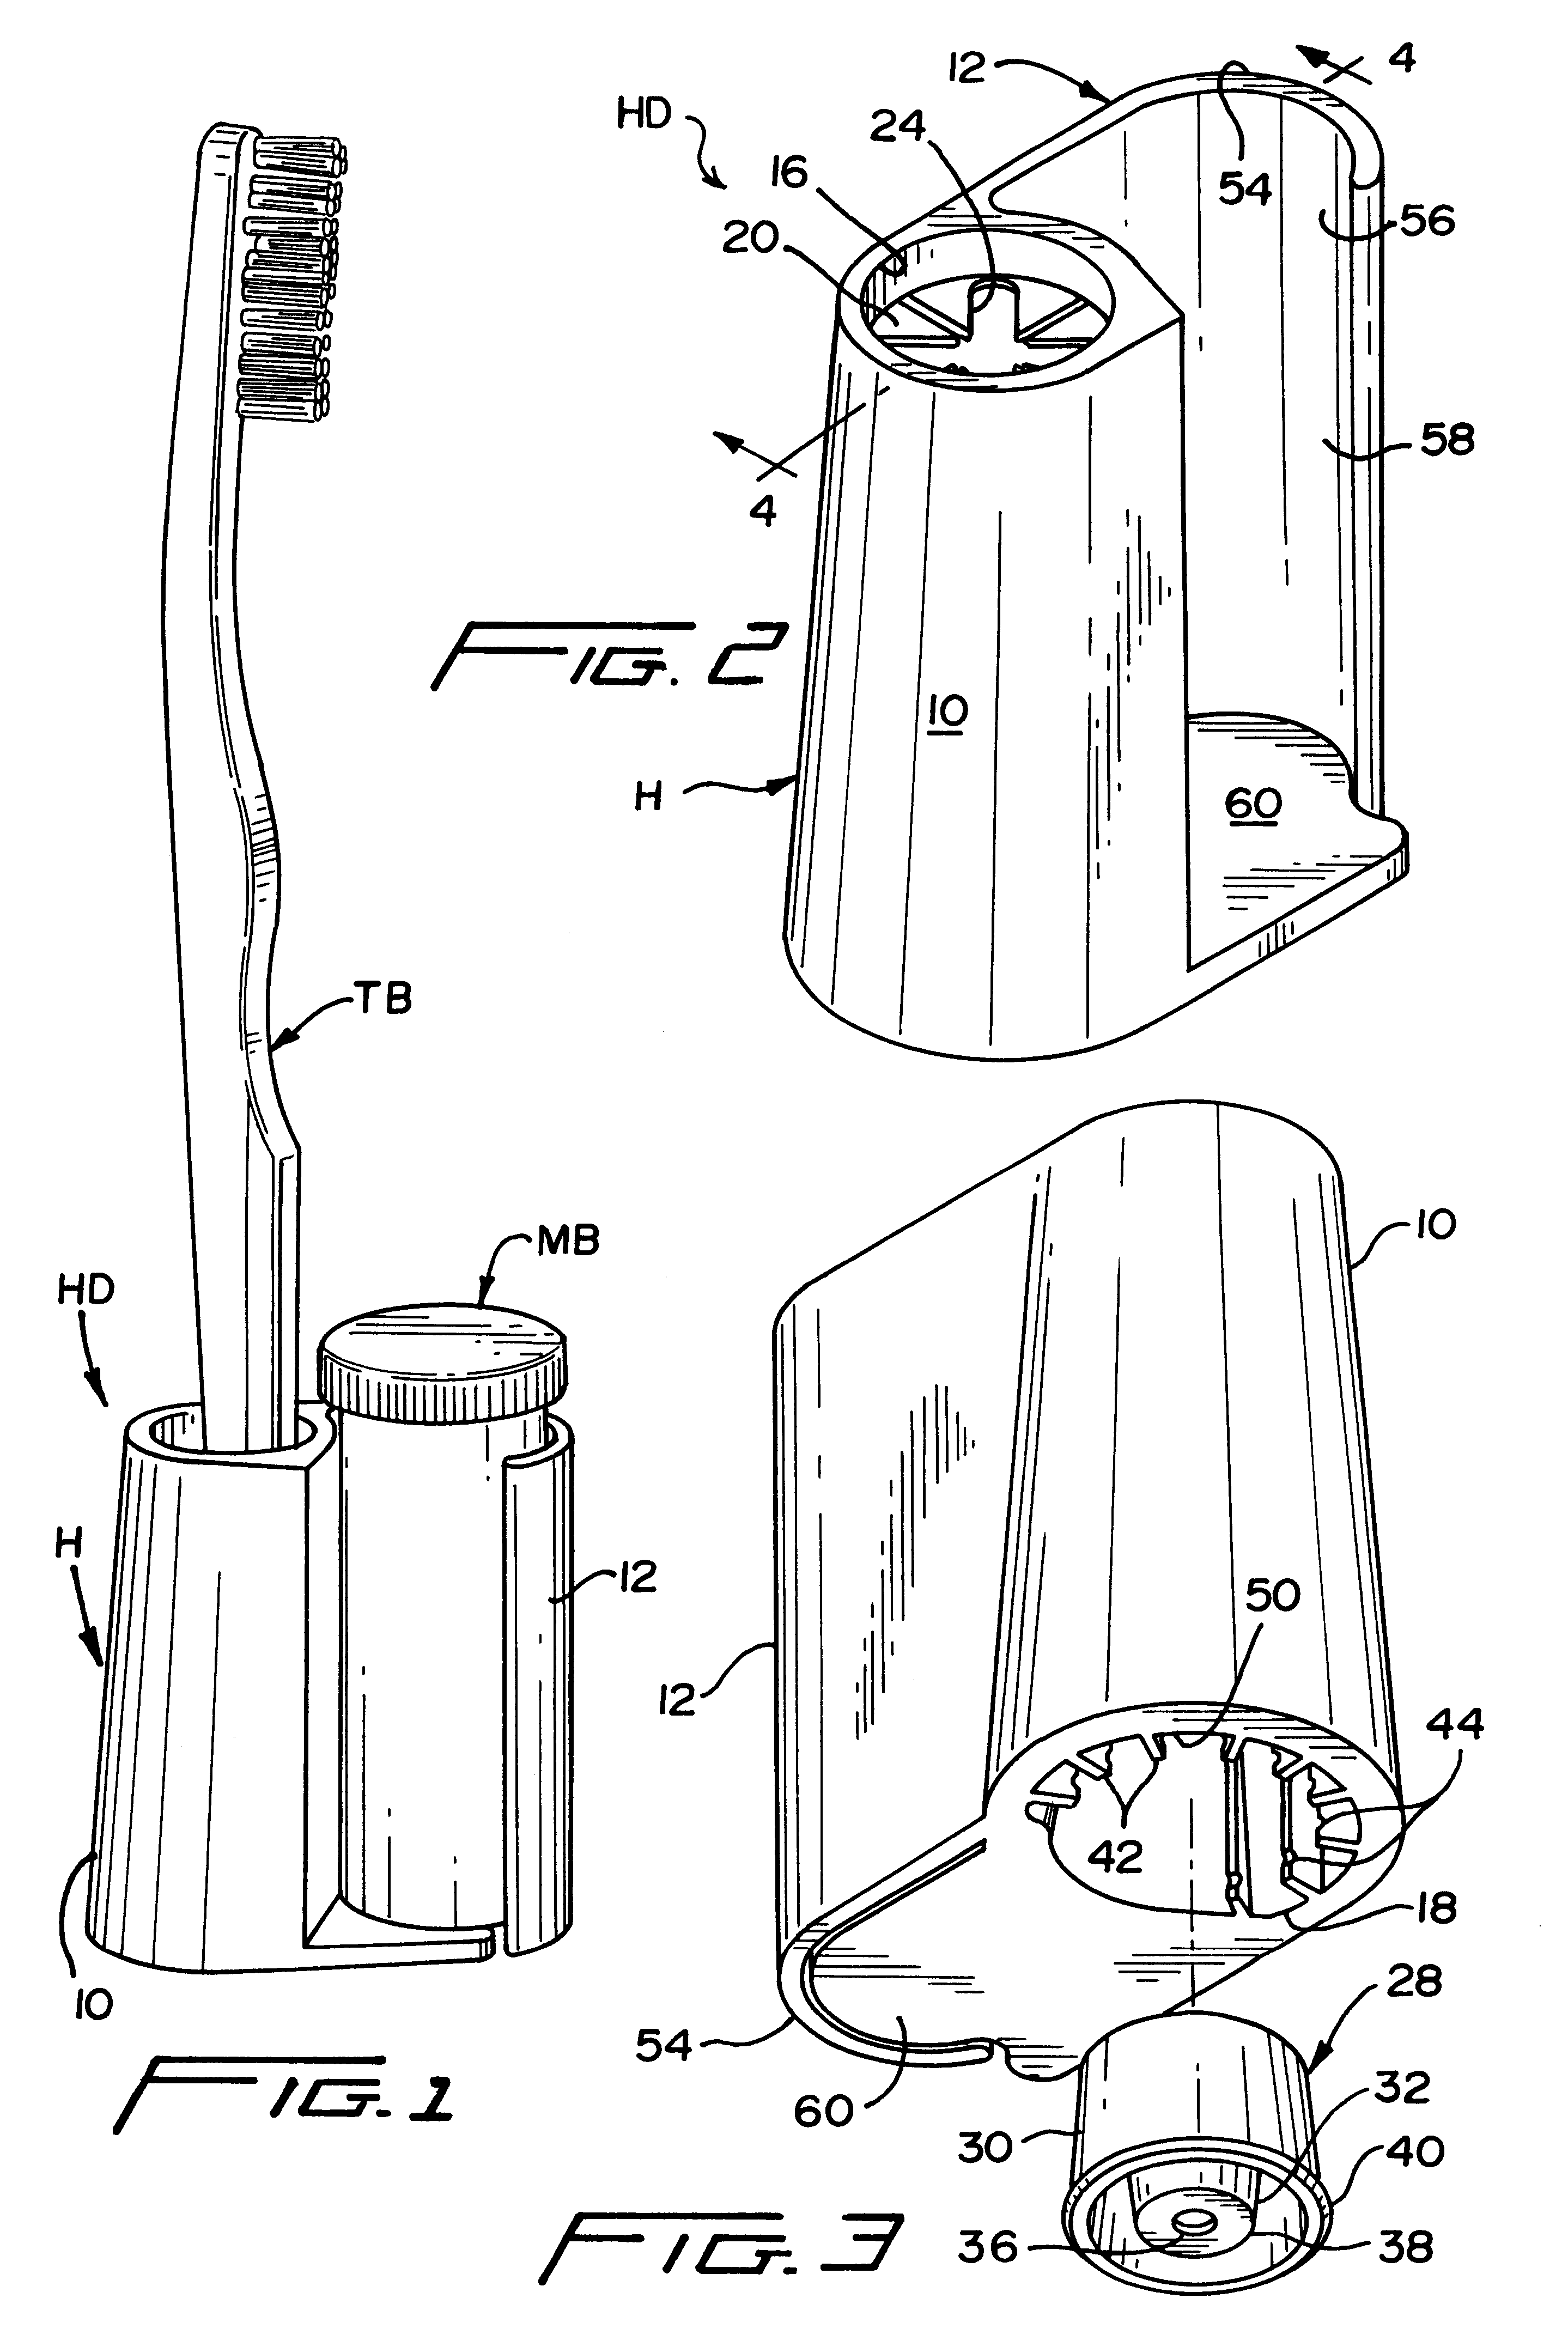 Health improvement device for modifying a daily behavior by reminding a person to take medication